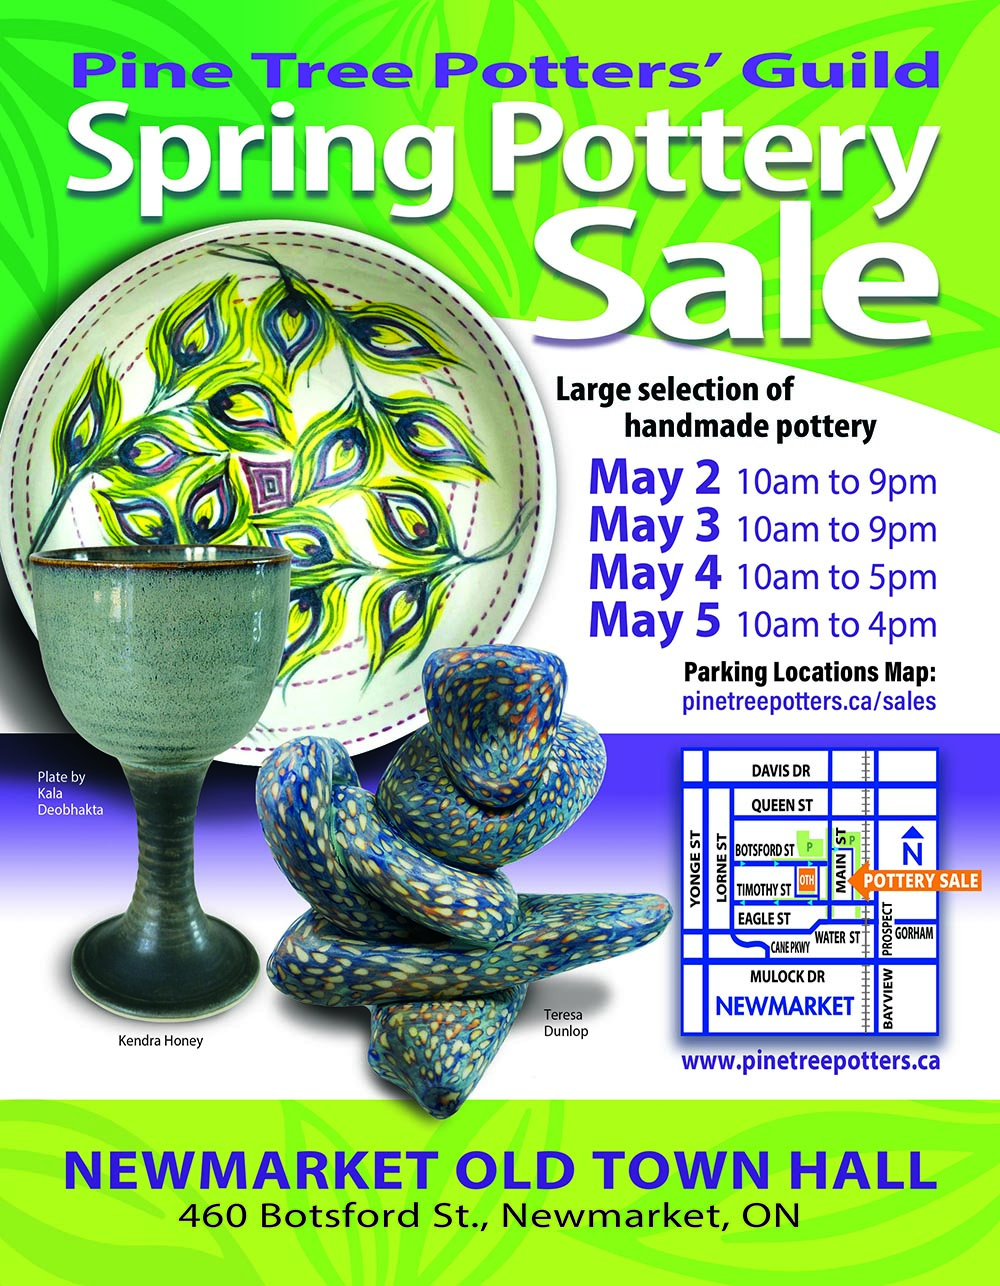 Pine Tree Potters' Spring Sale, May 2nd to May 5th